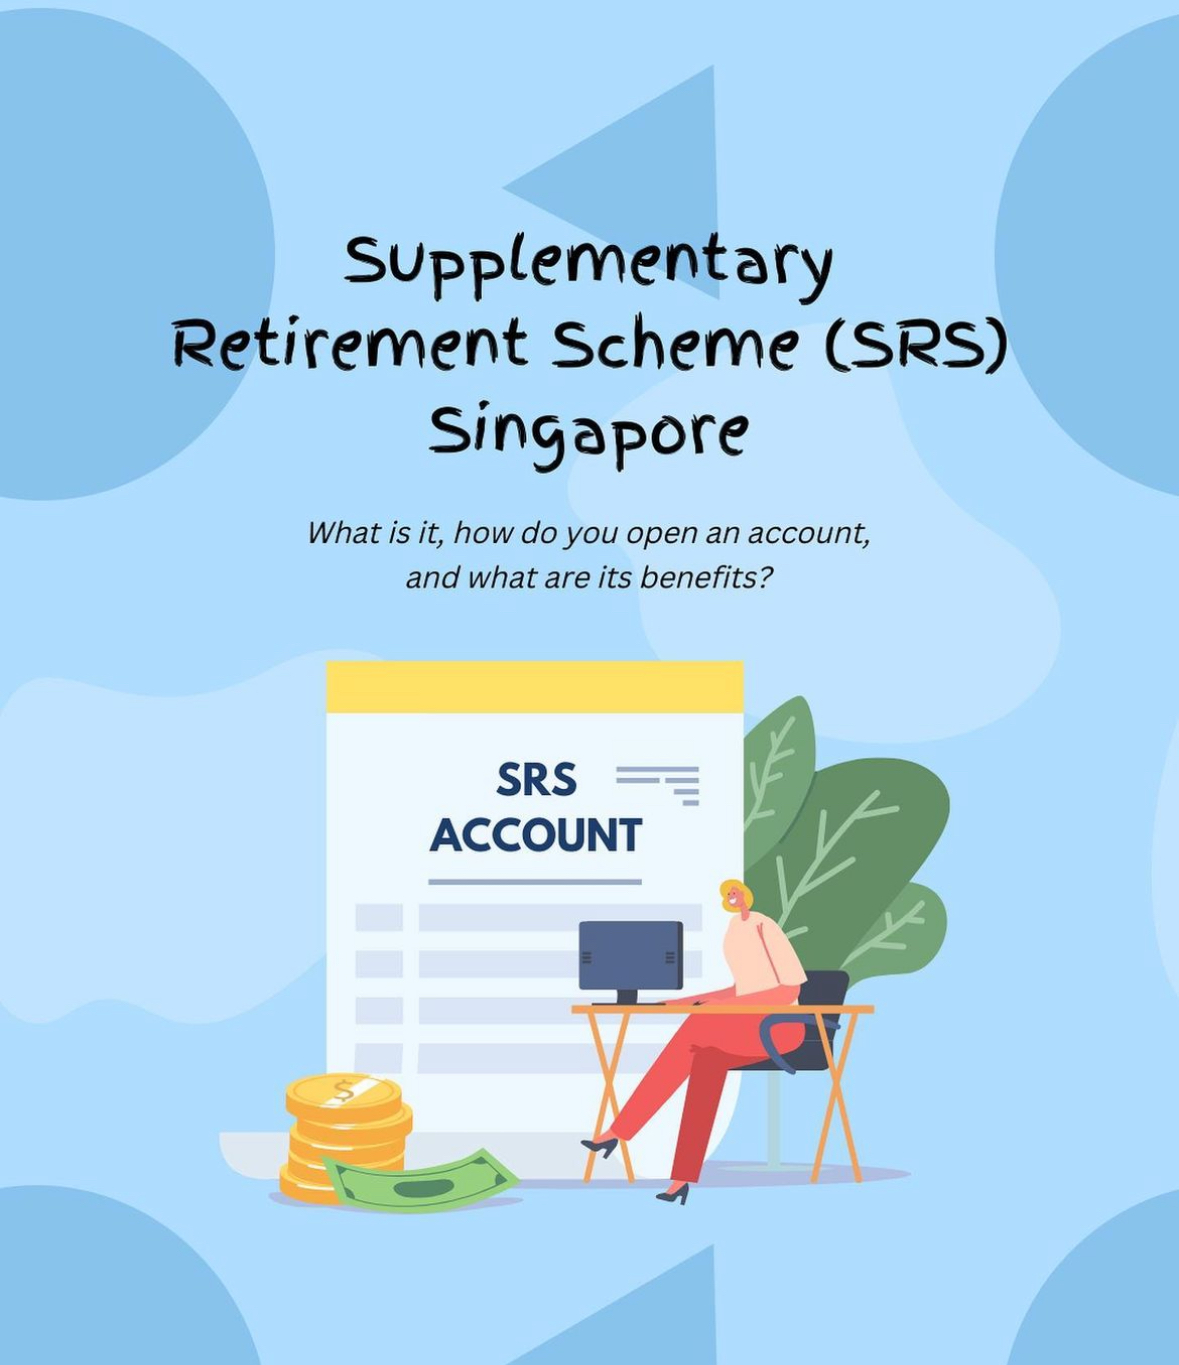 All about the Supplementary Retirement Scheme (SRS) in Singapore, including what it is, how to open an account, what benefits it offers & more